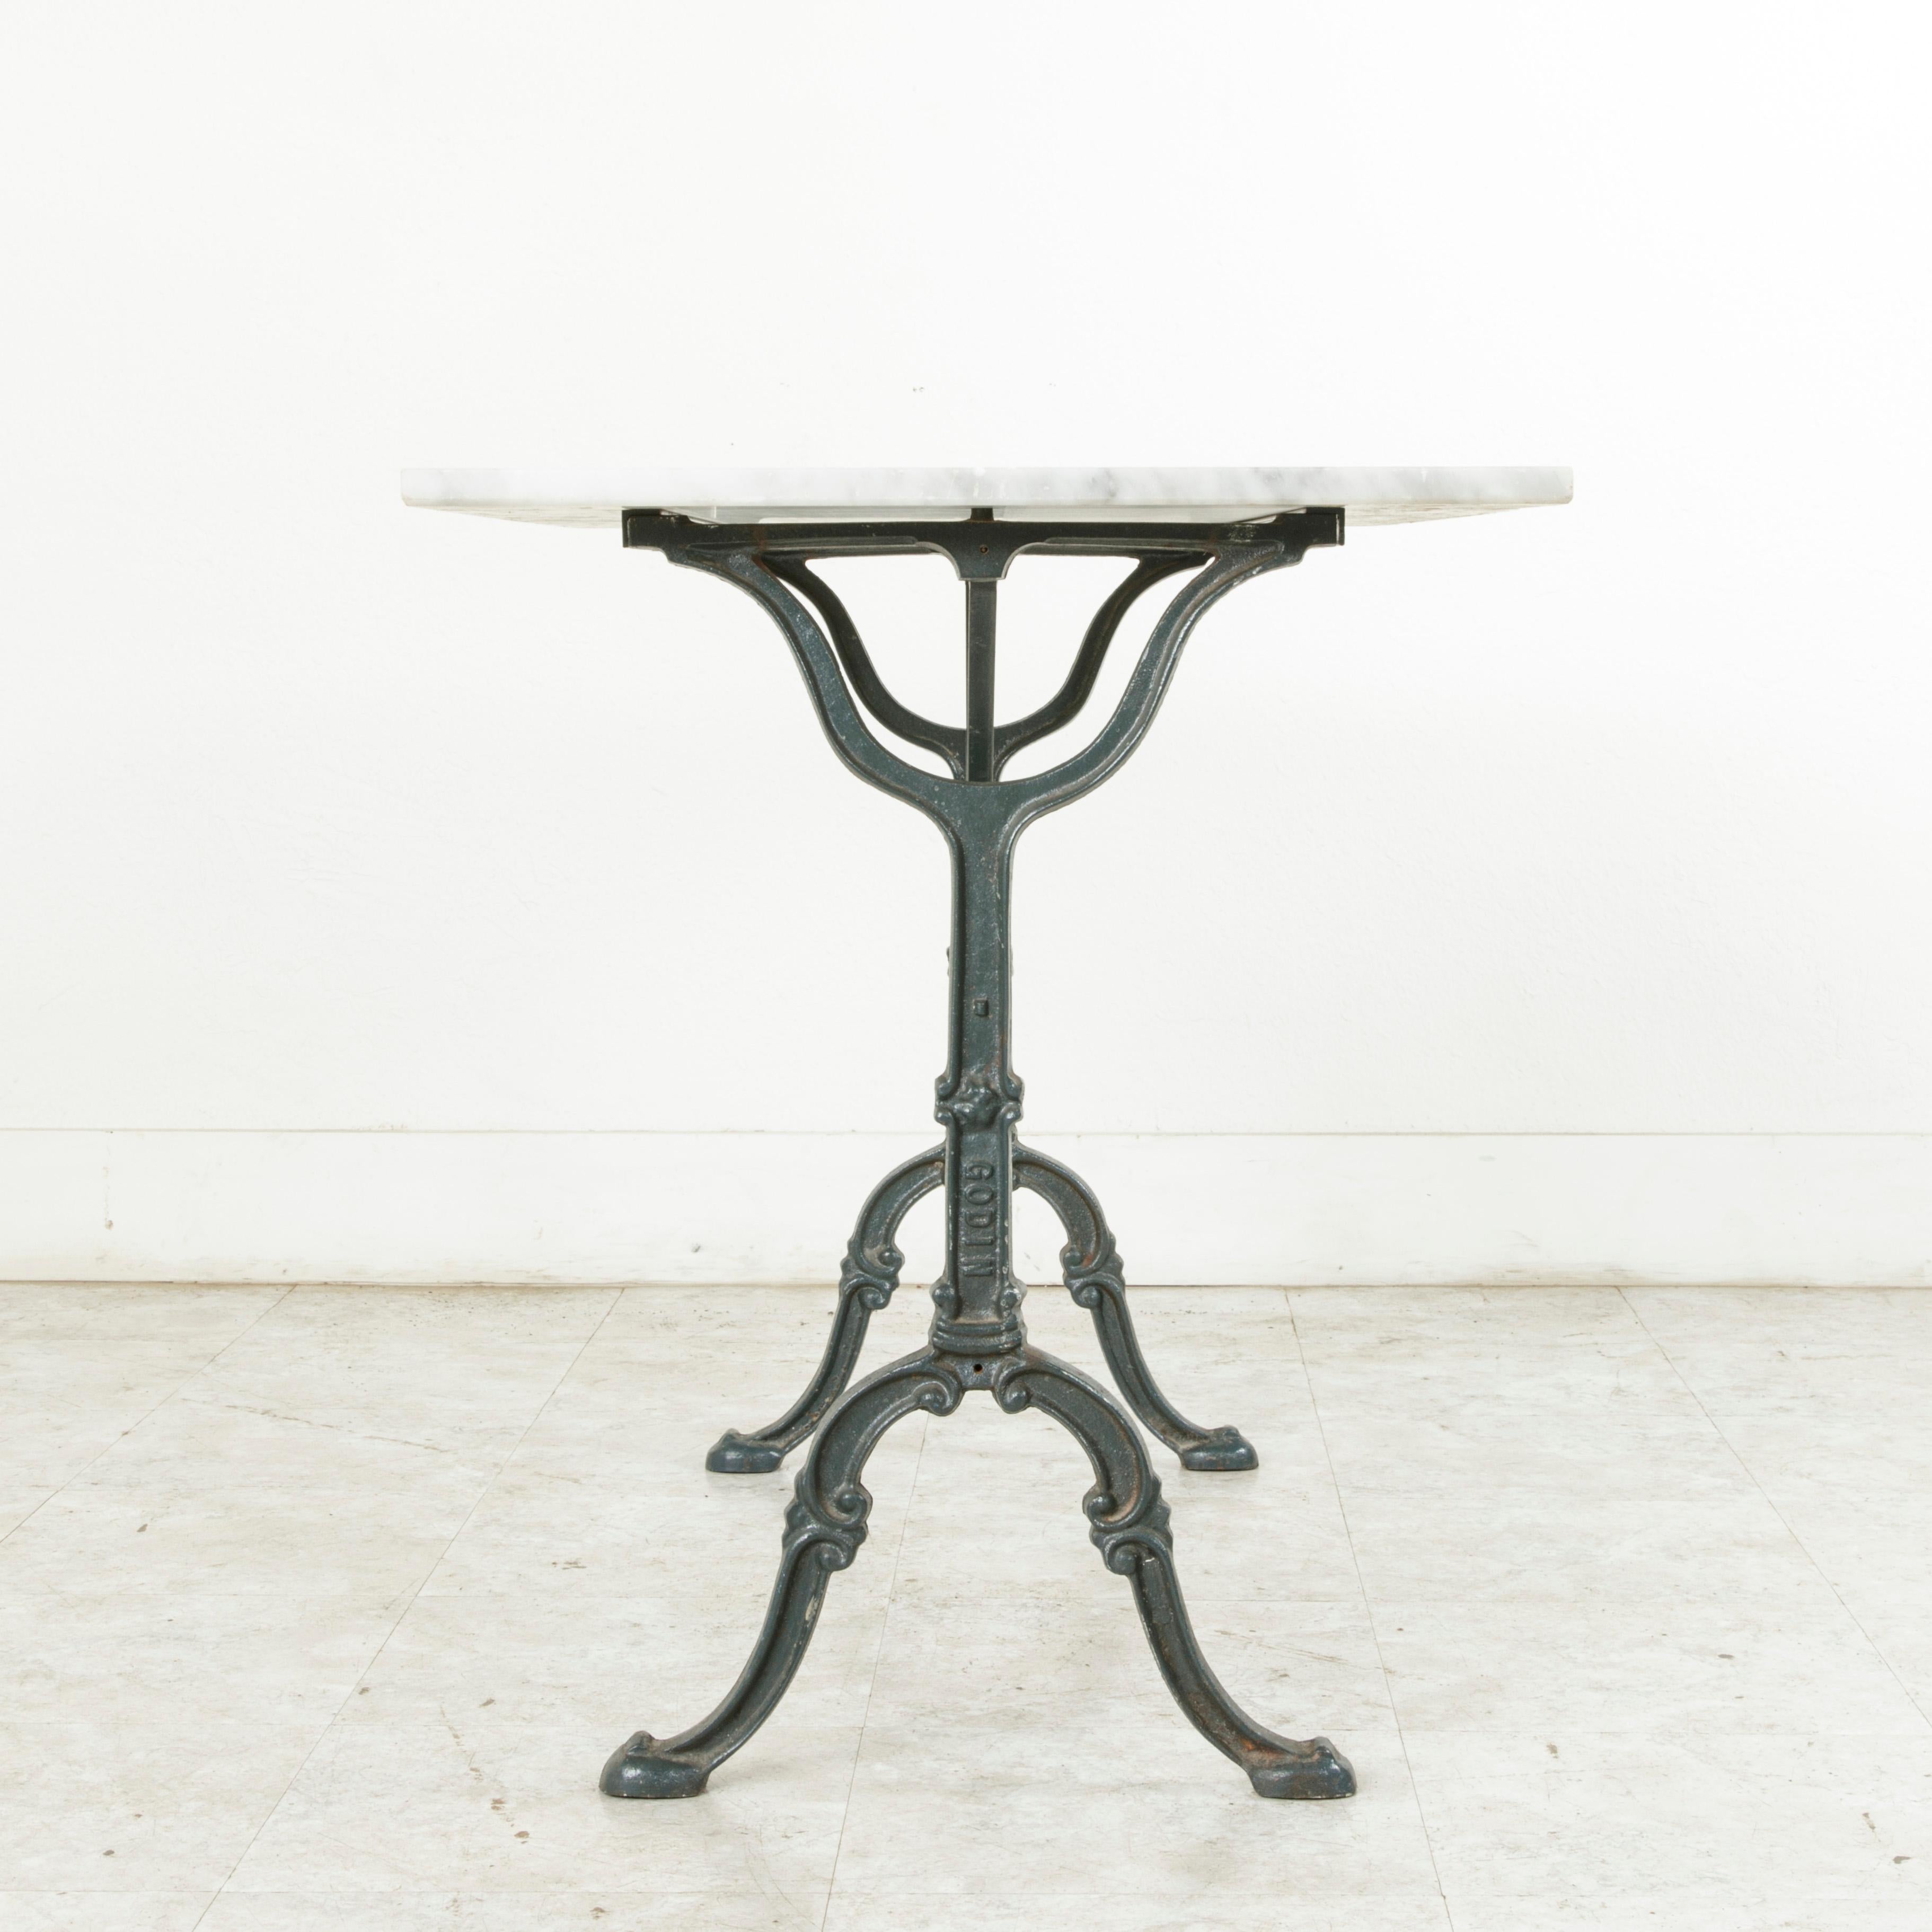 Cast Early 20th Century French Iron Bistro Table with Maker's Name Godin, Marble Top